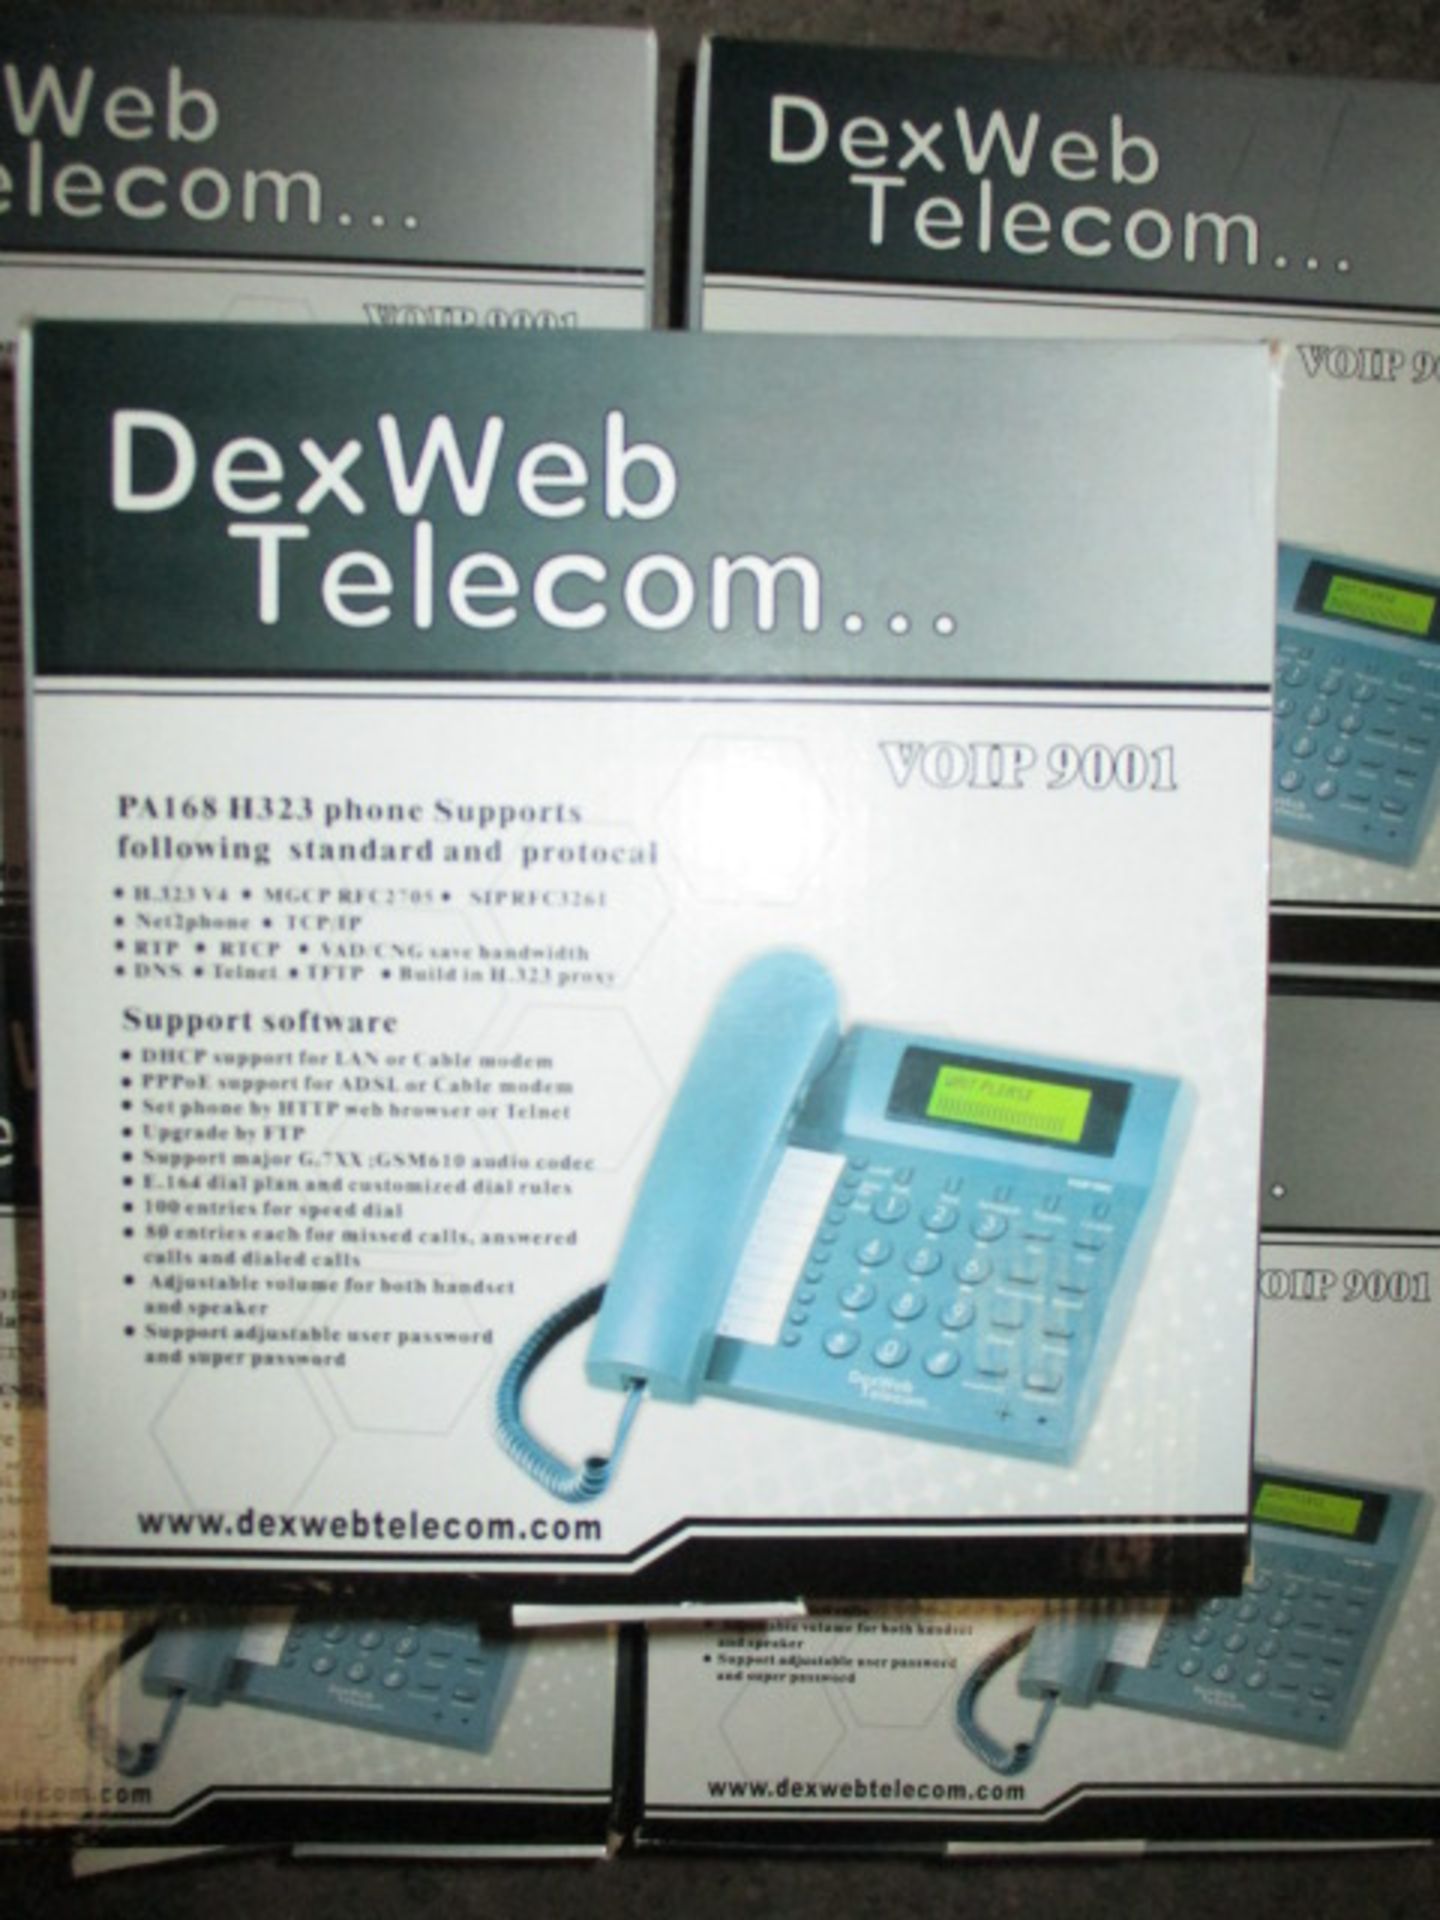 6 x Dexweb Telecom VOIP 9001 IP Phones - New and Boxed - Image 2 of 2